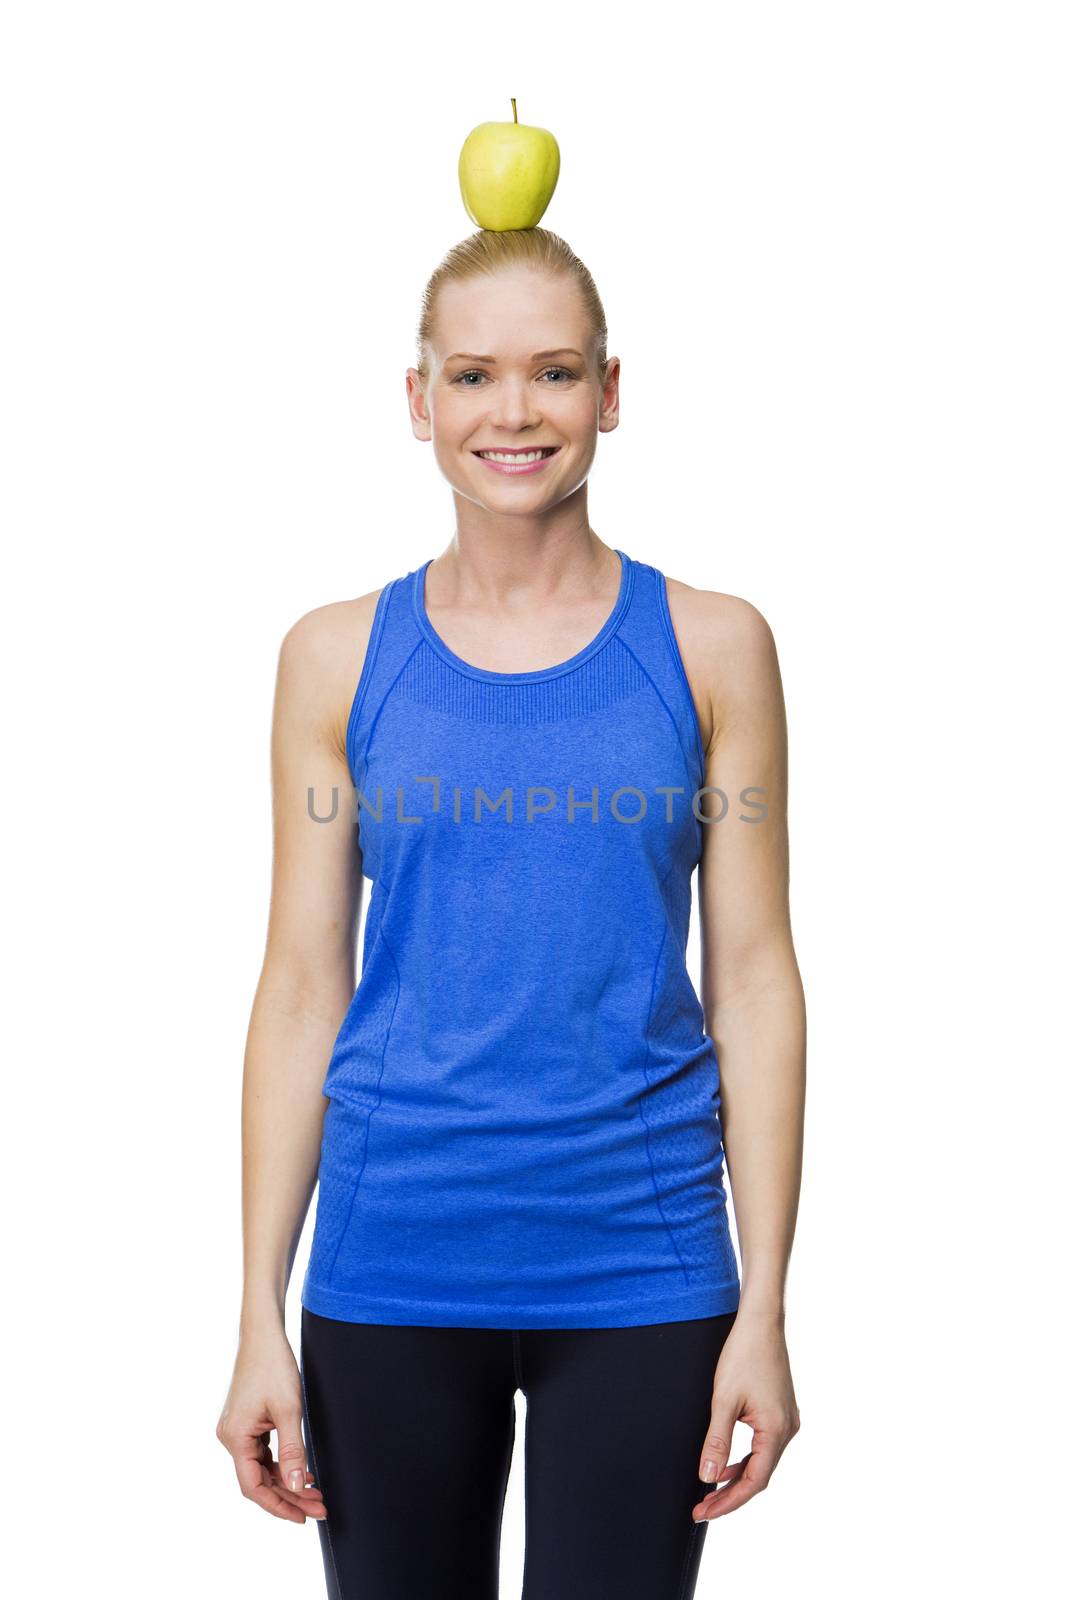 woman in fitness clothing by Flareimage